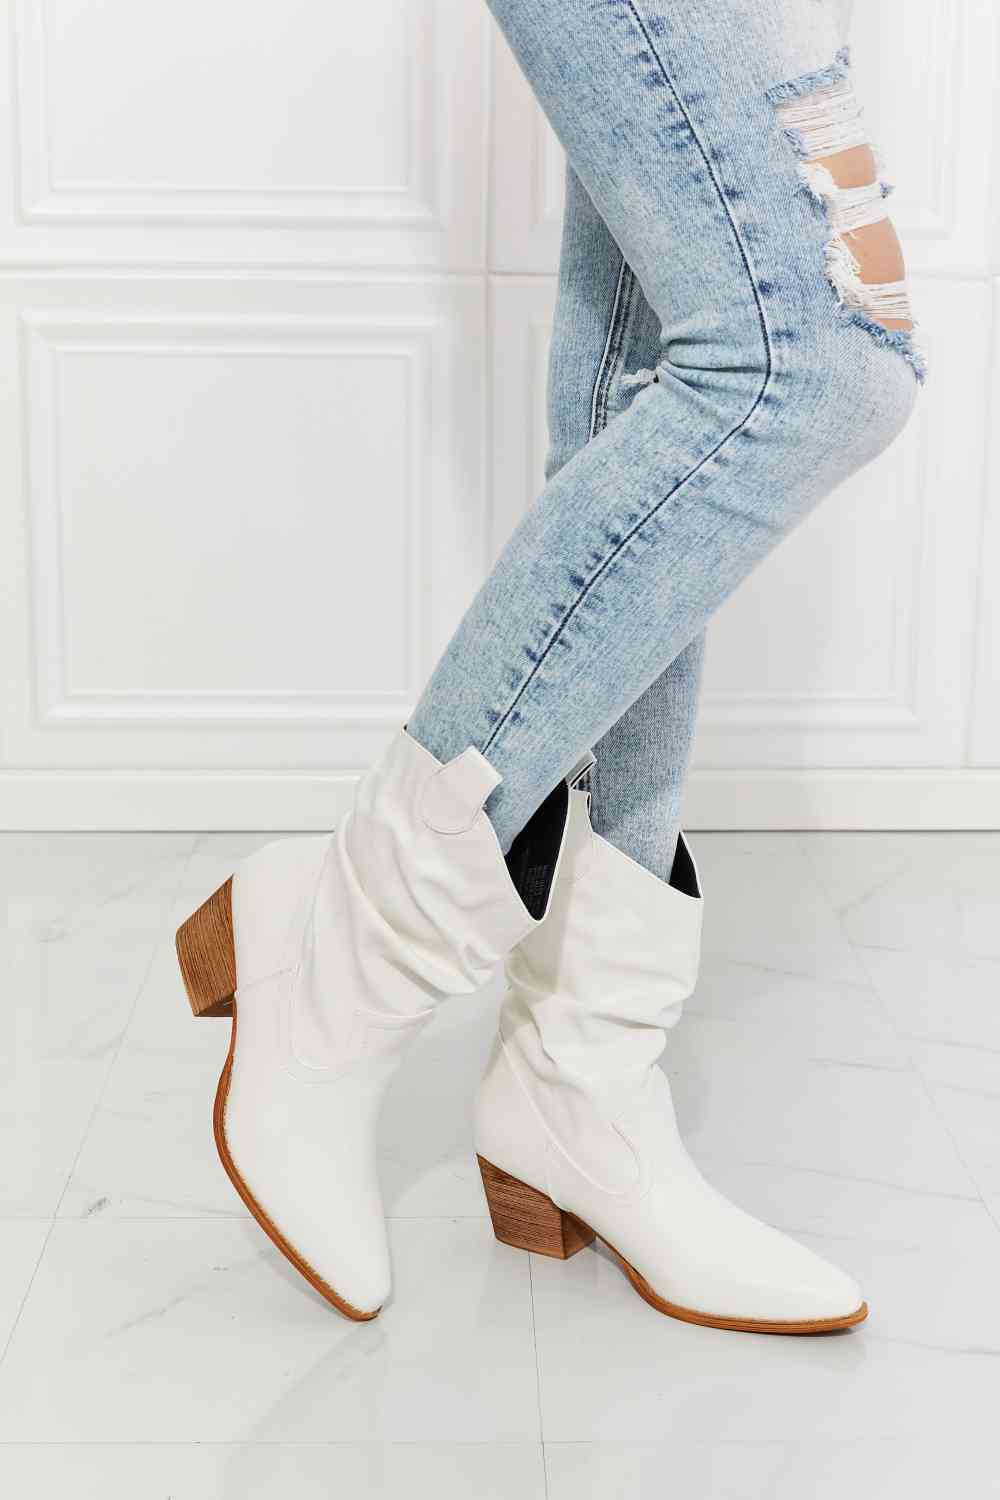 MMShoes Better in Texas Scrunch Cowboy Boots in White - Alonna's Legging Land